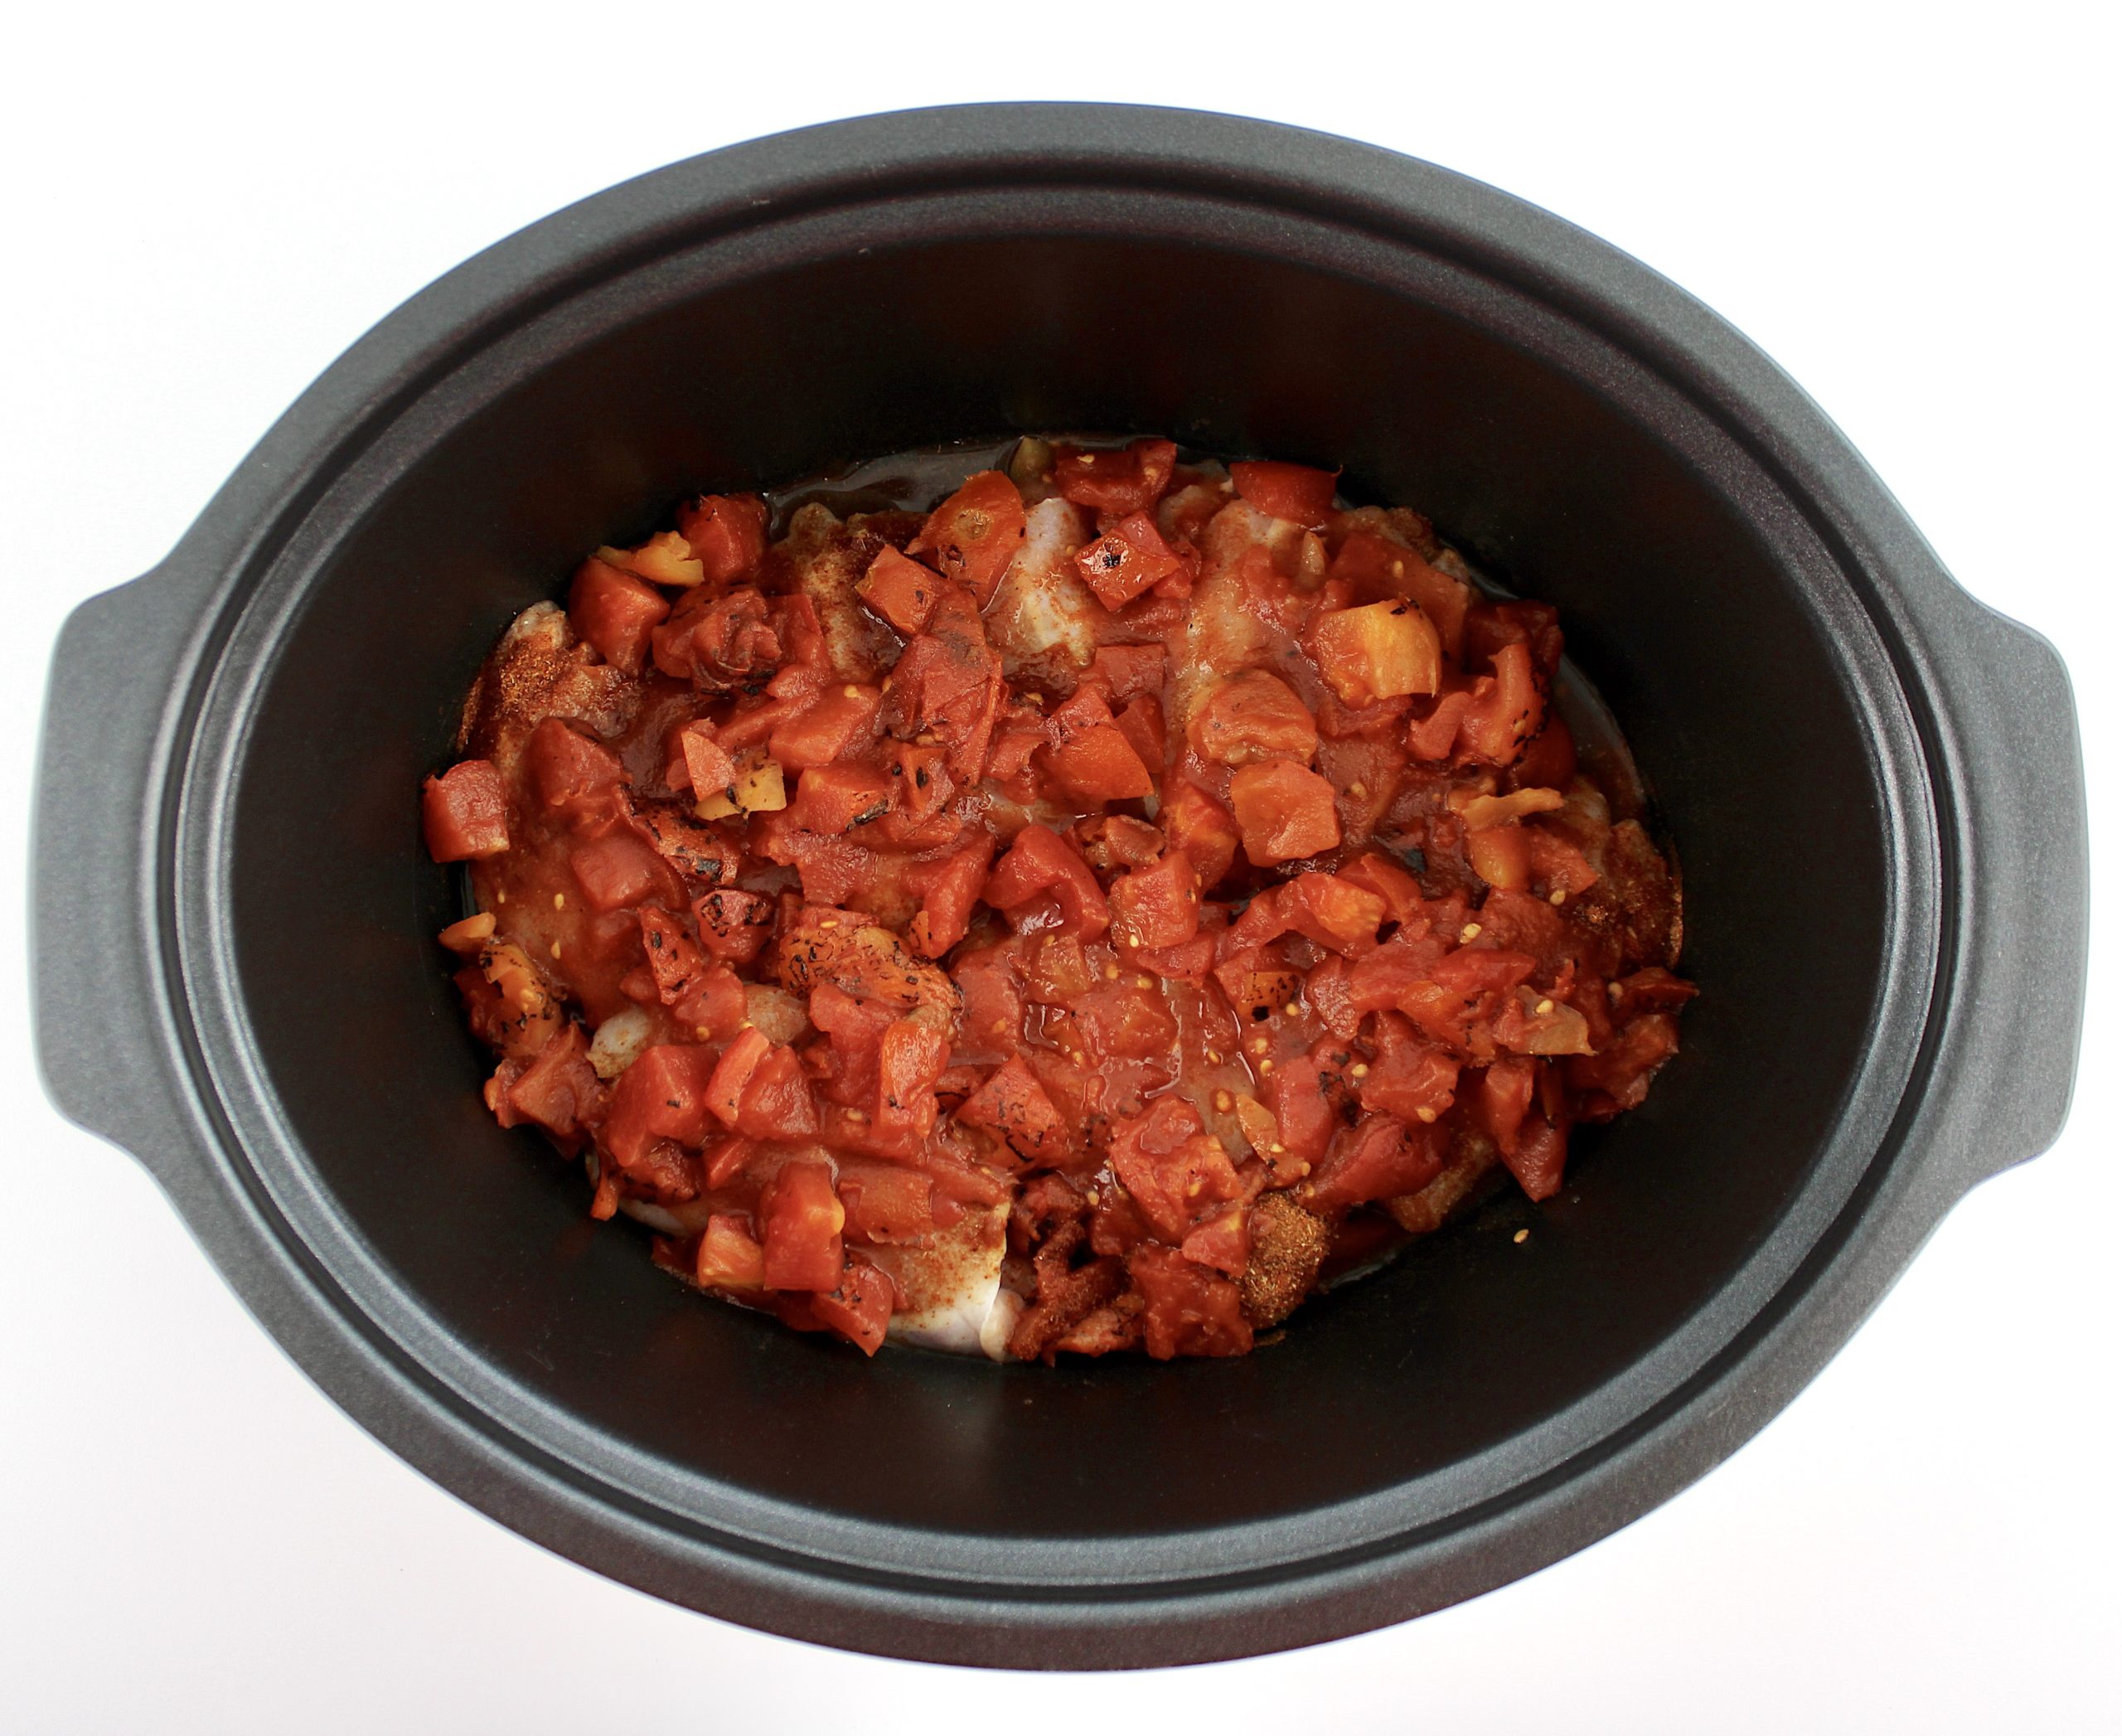 diced fire roasted tomatoes in slow cooker insert